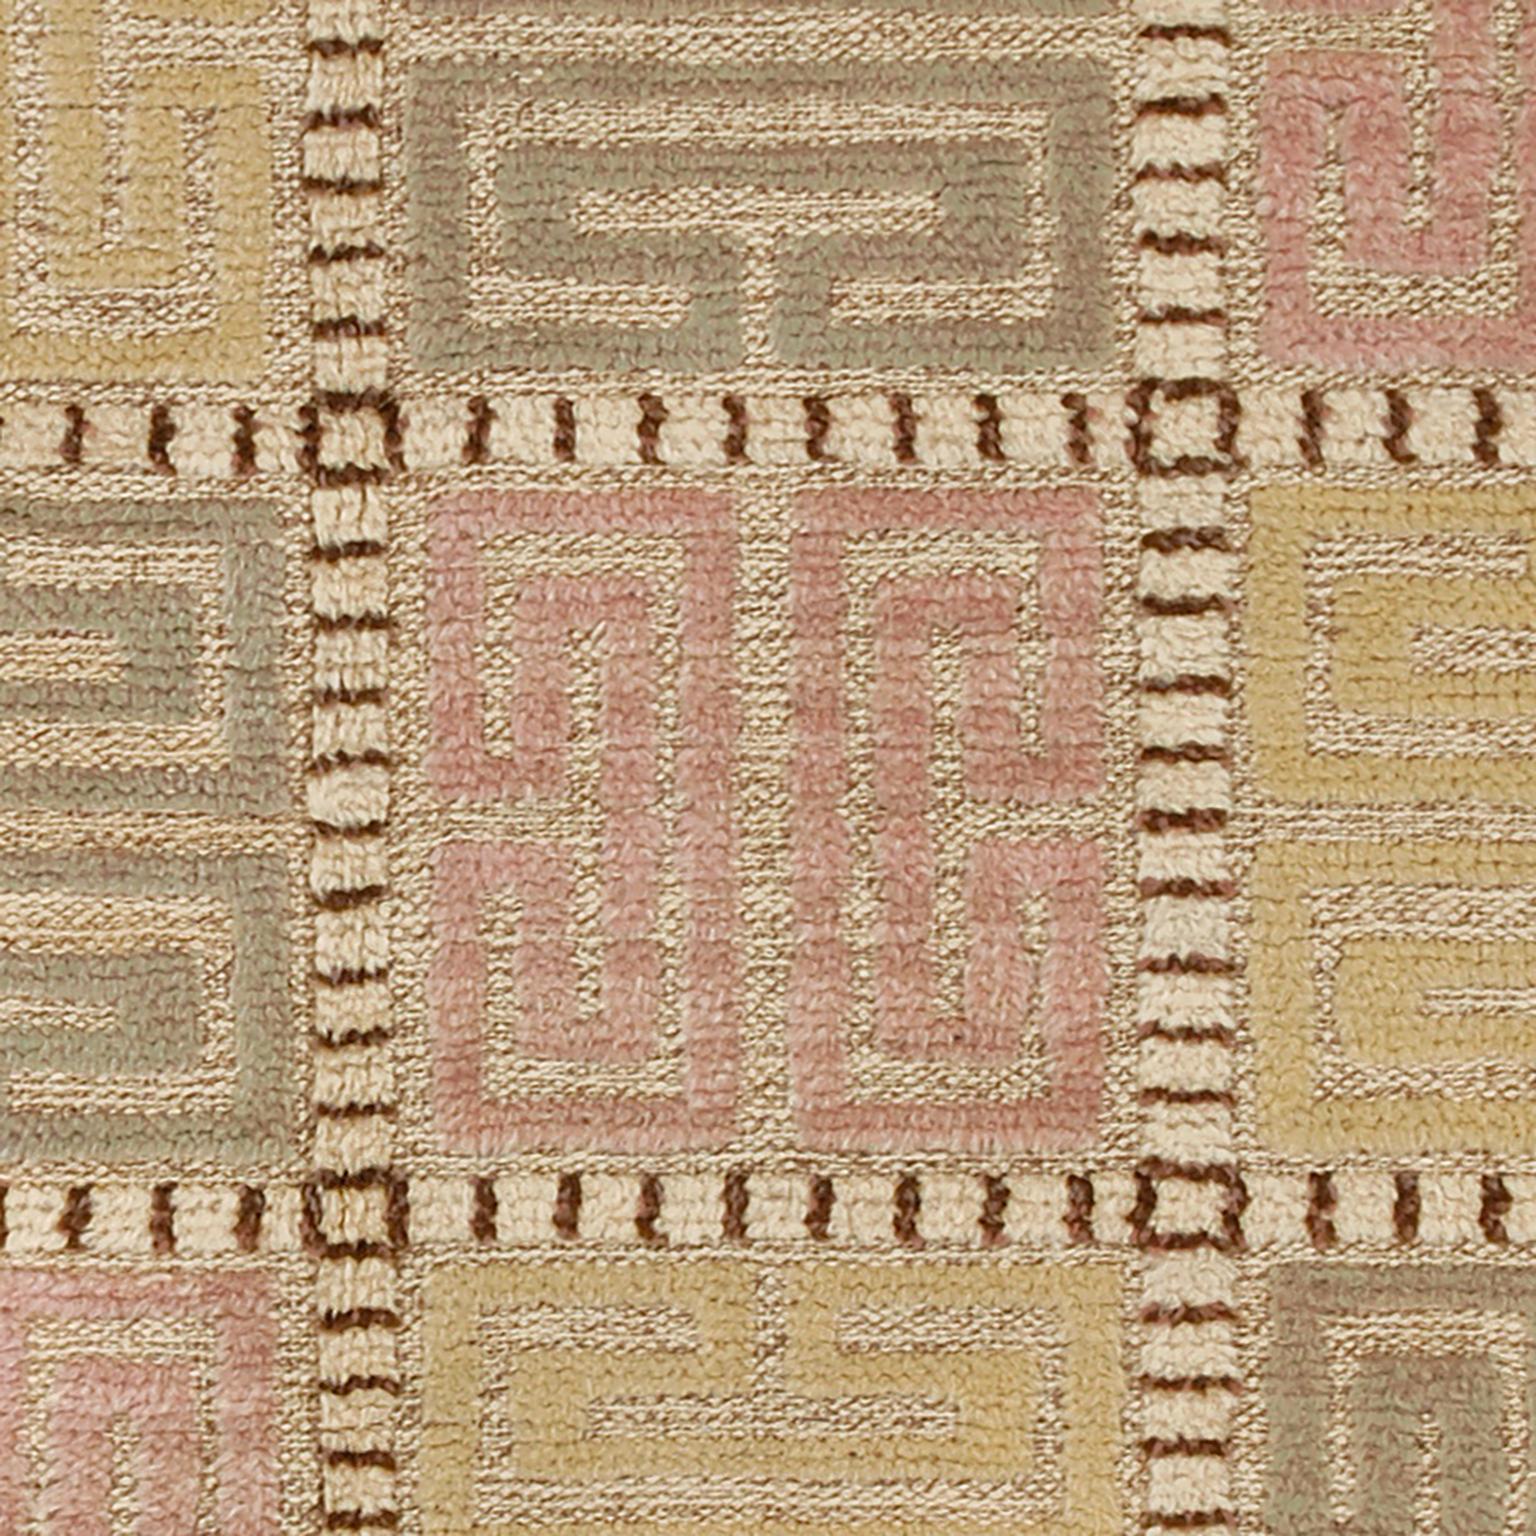 Mid 20th Century Swedish Pile Carpet by AB Märta Måås-Fjetterström In Excellent Condition For Sale In New York, NY